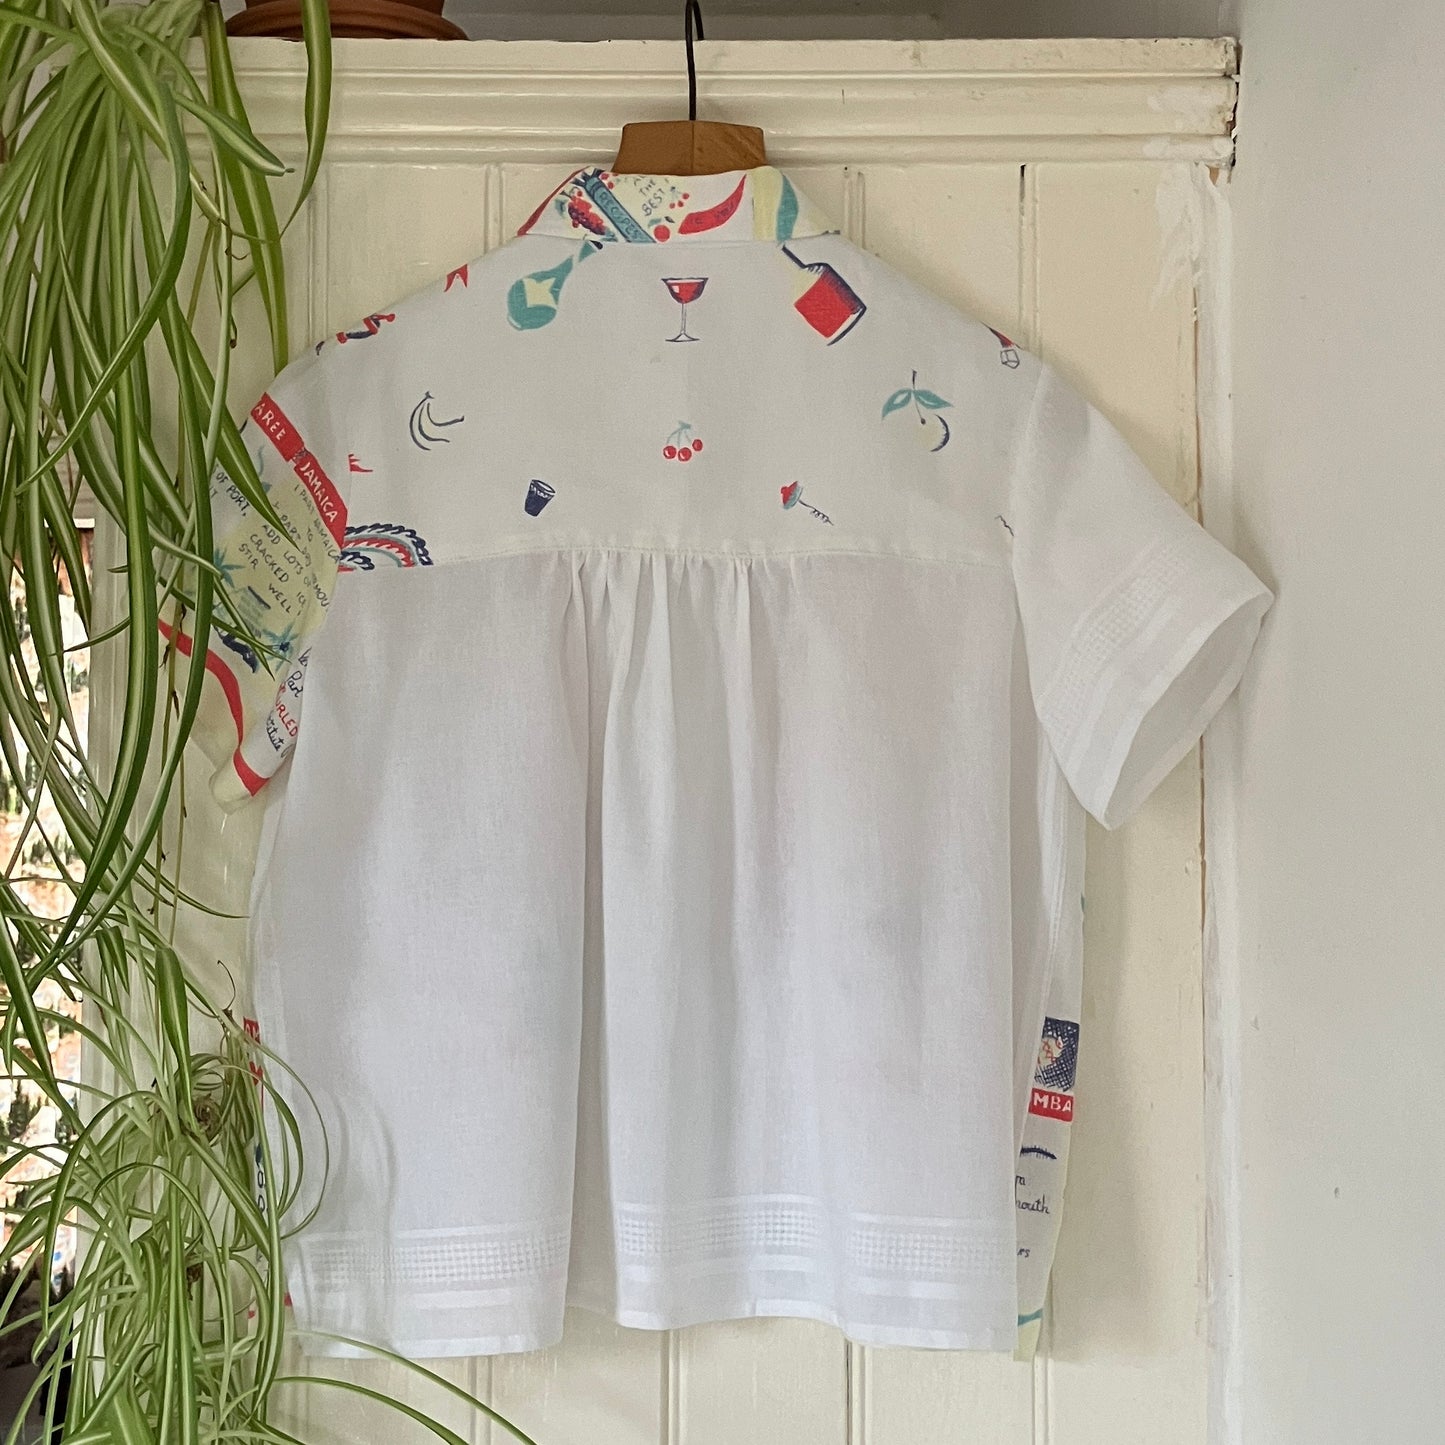 A shirt handmade from a vintage 'cocktails' tablecloth, featuring recipes and illustrations (back view)